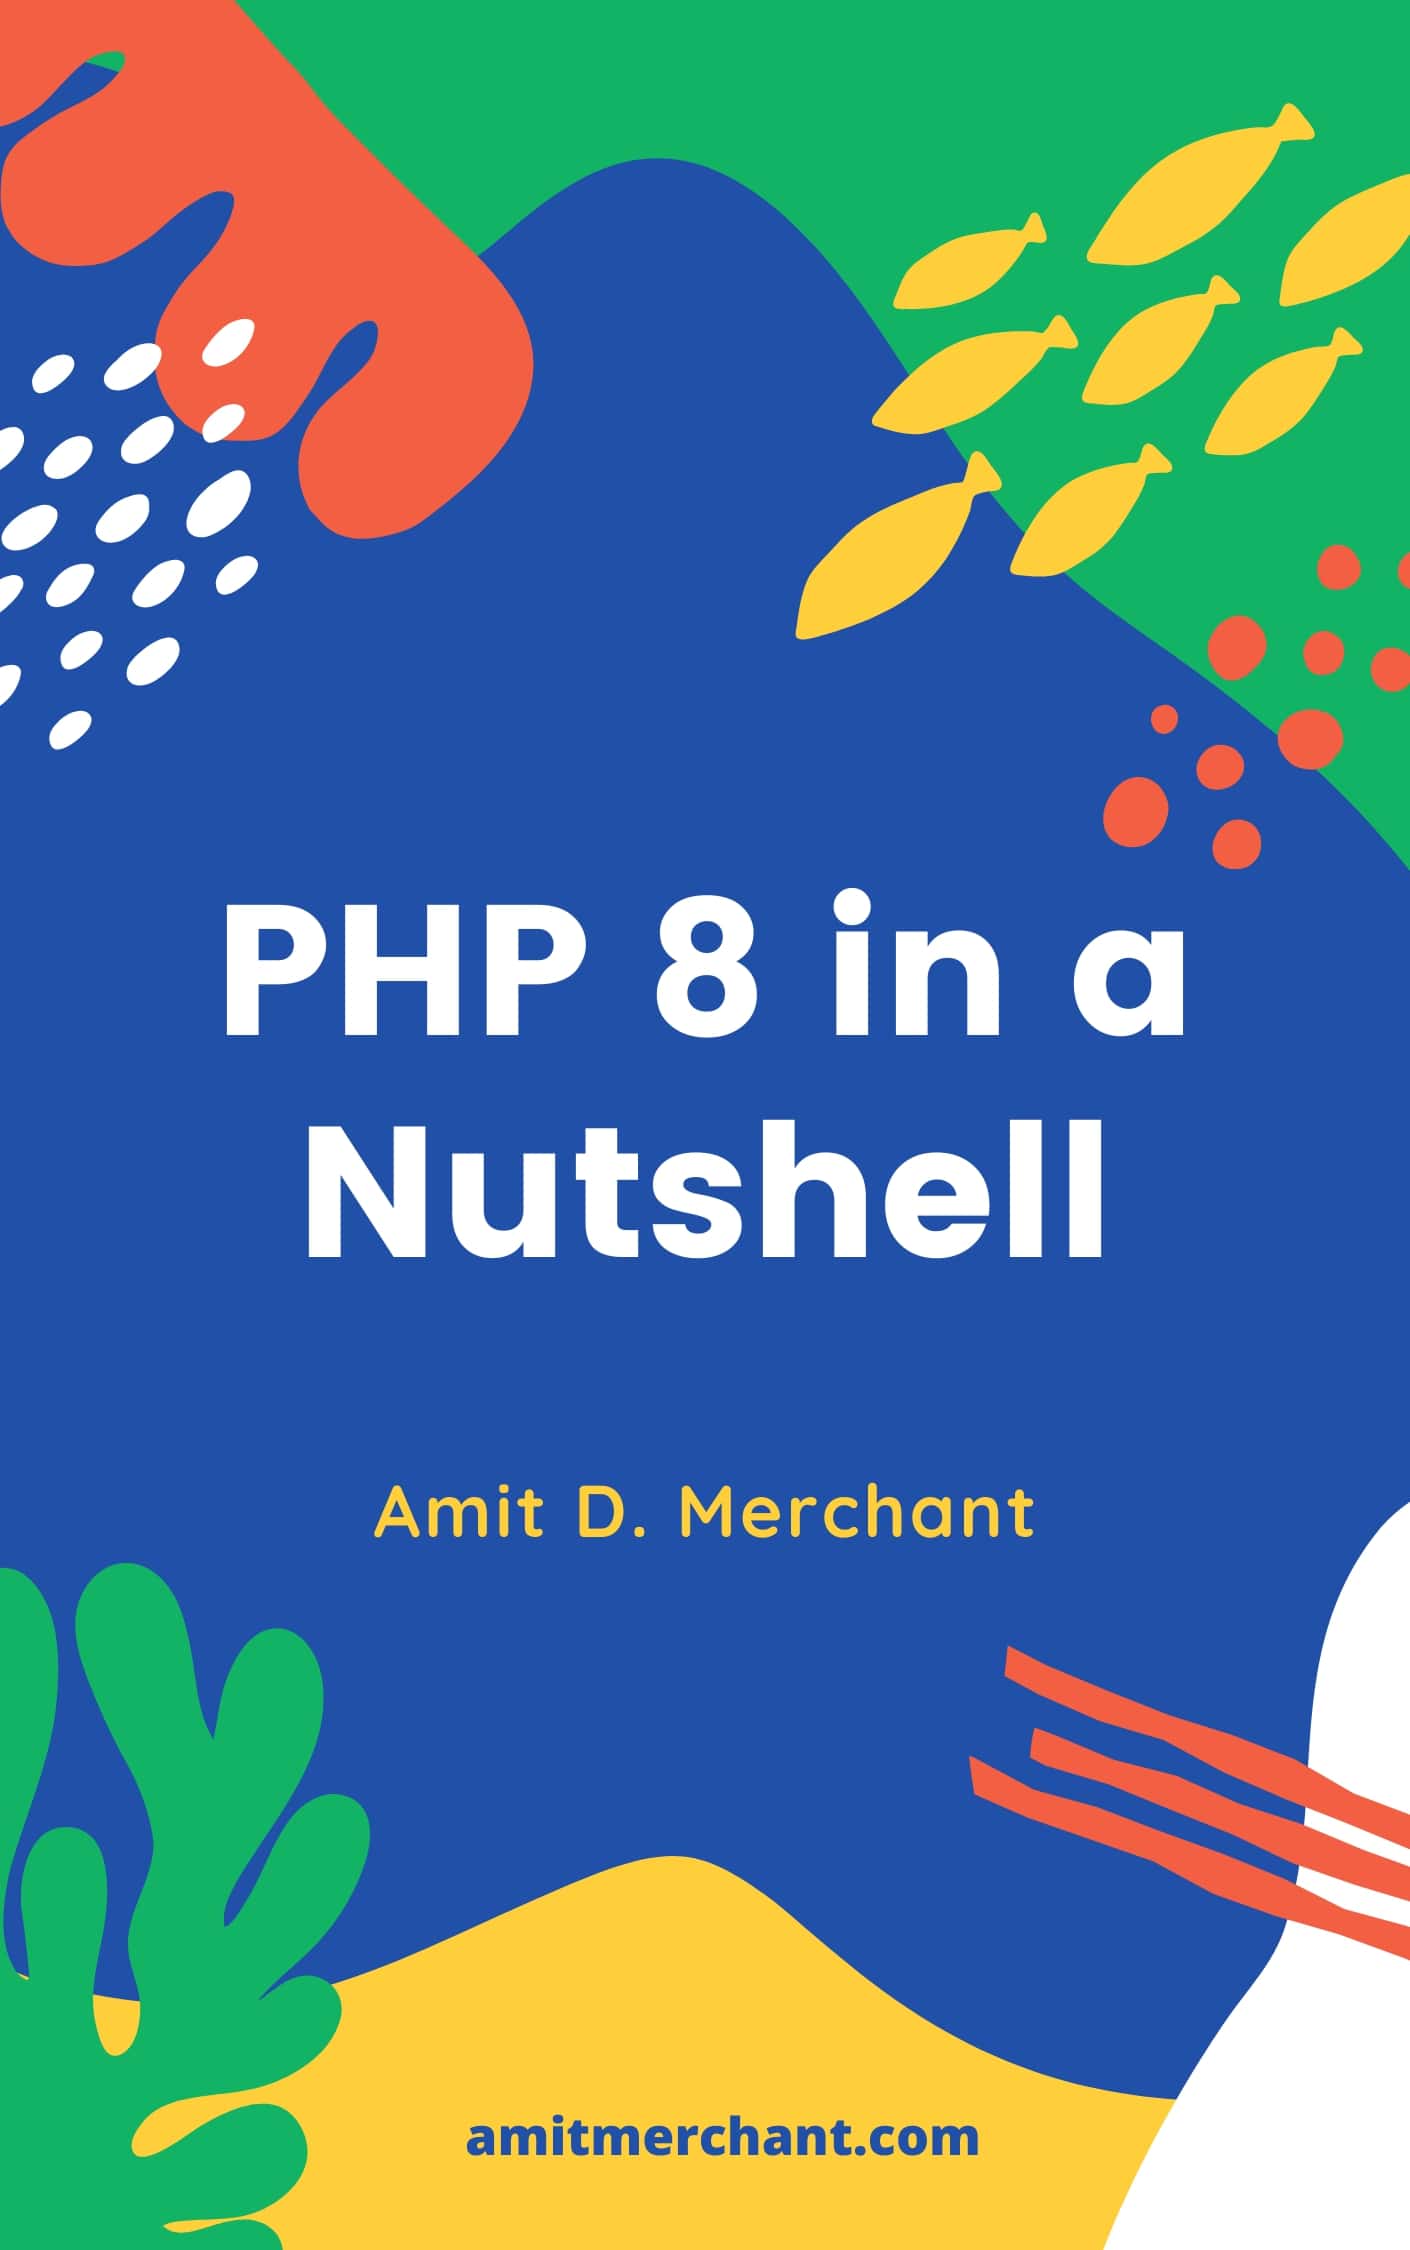 PHP 8 in a Nutshell book cover